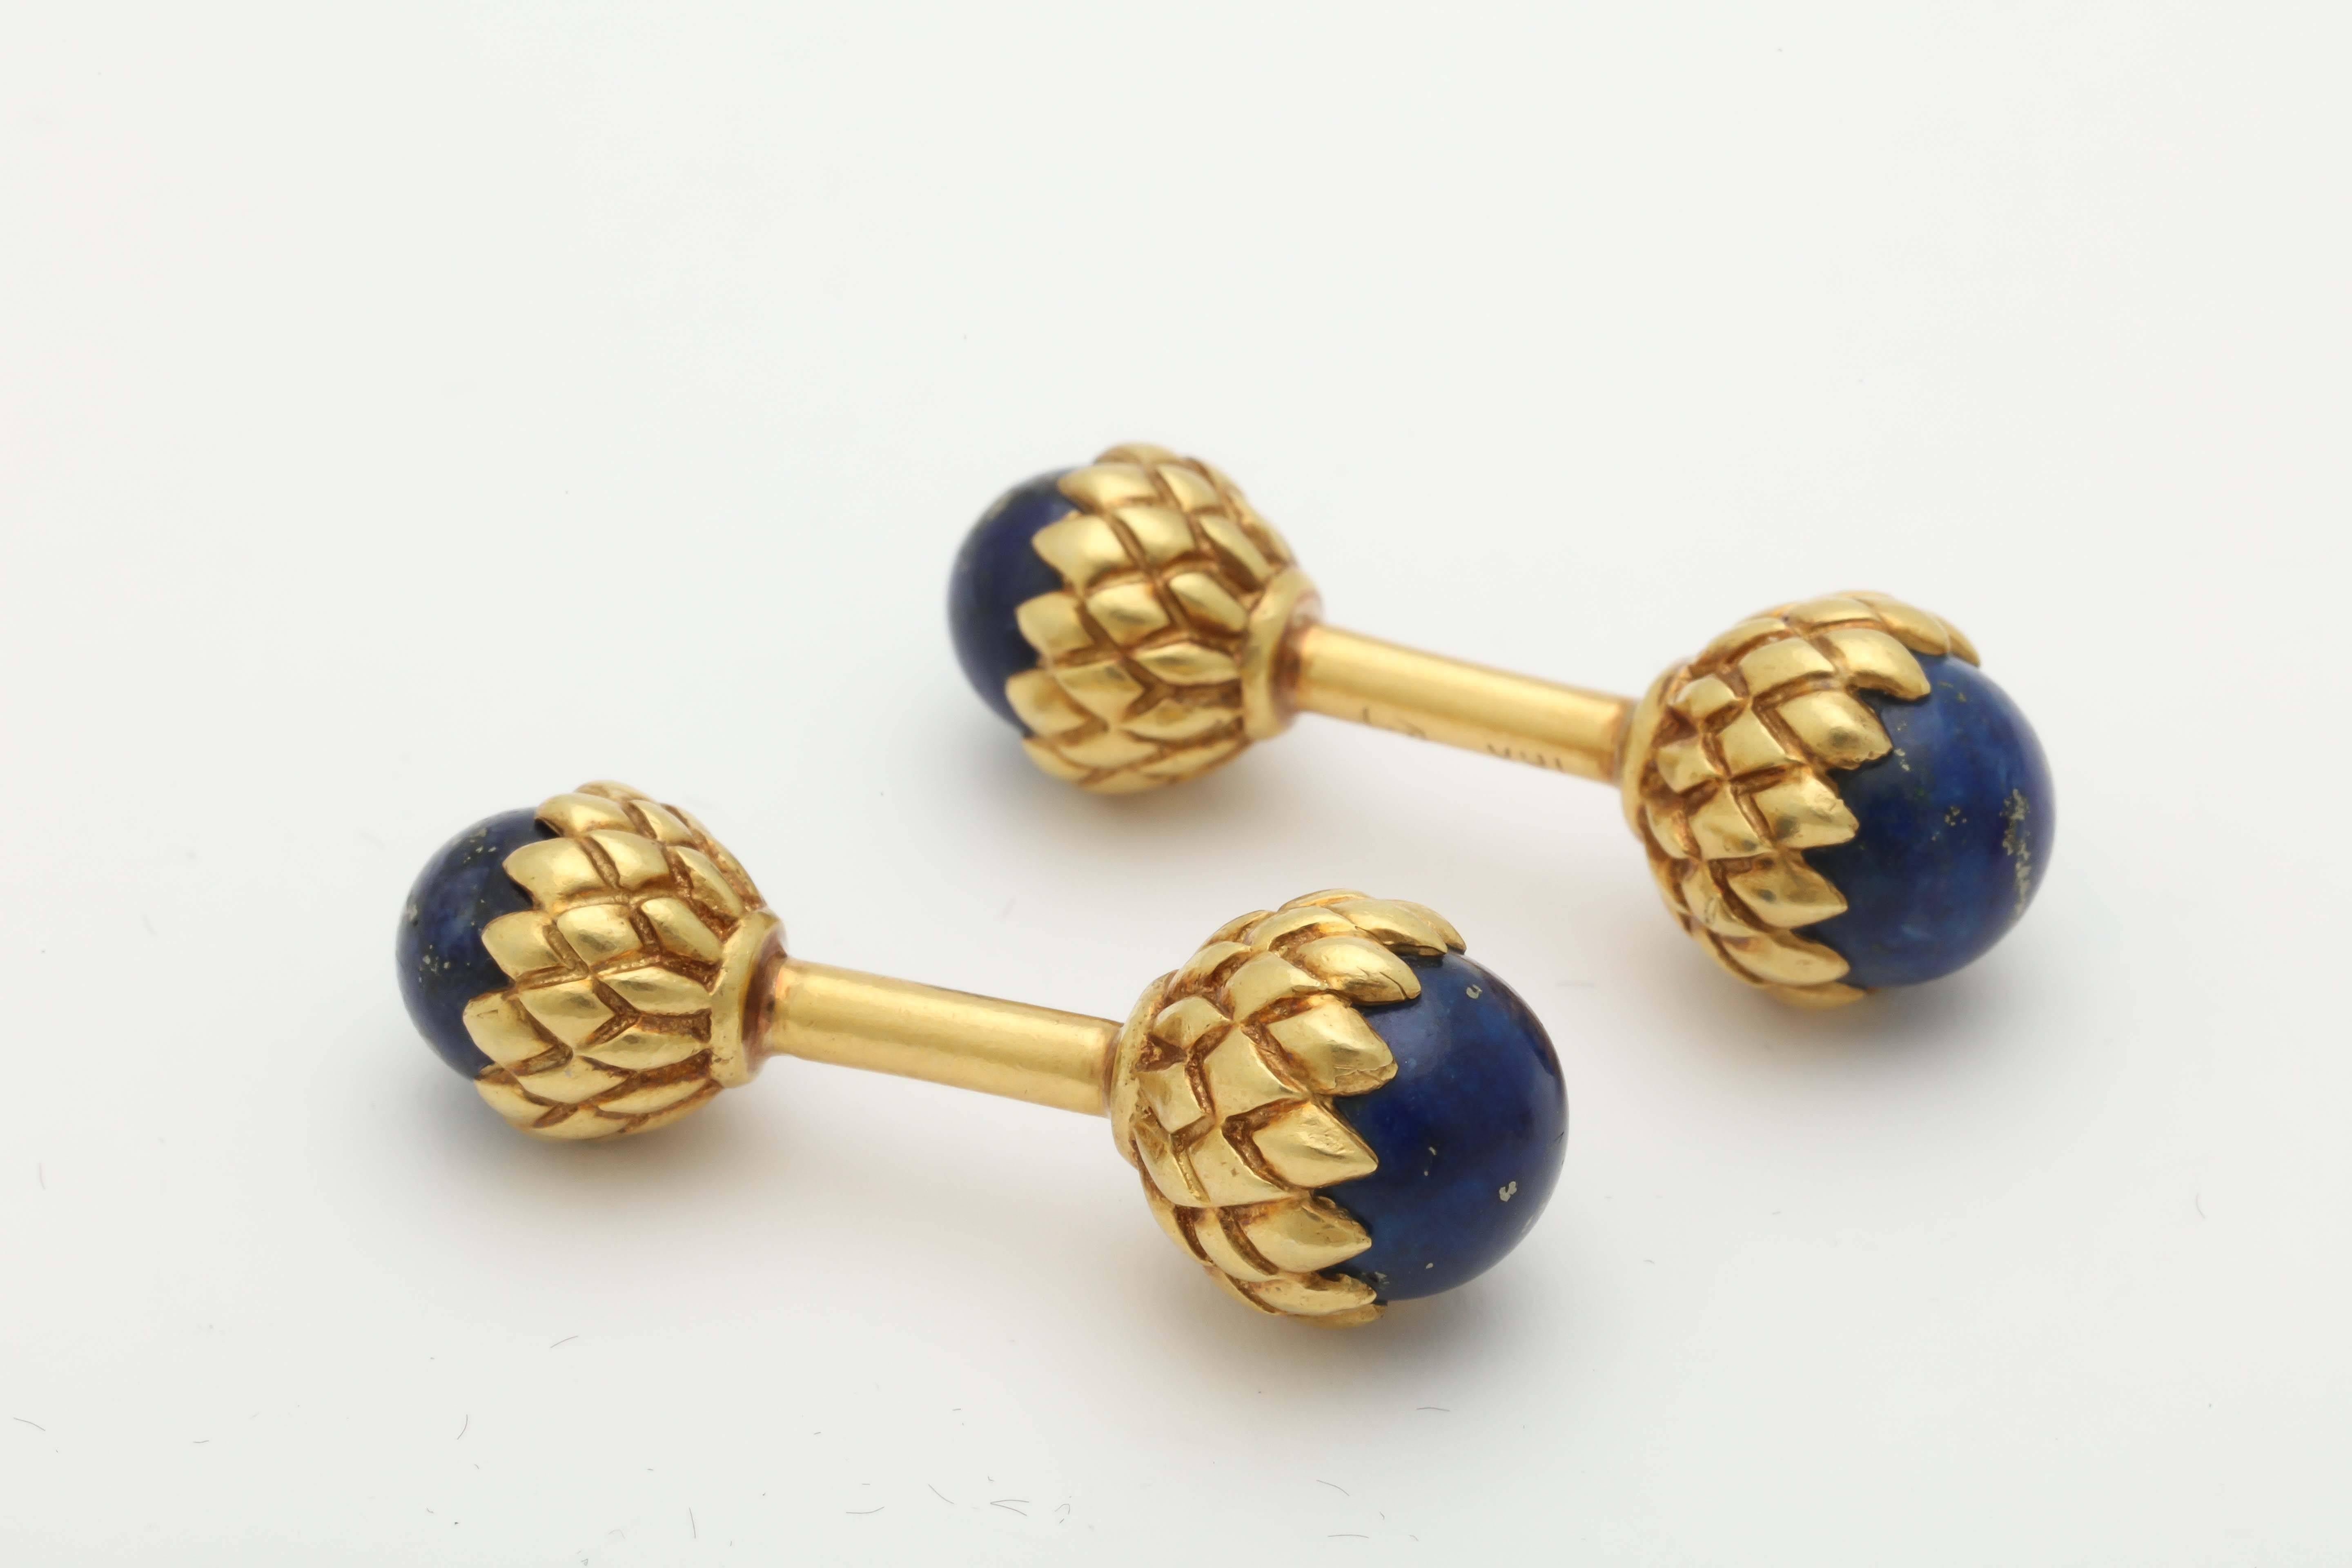 18kt yellow gold acorn pattern stud set included in Dress Set are 3 Studs with cabochon set Lapis Lazuli Stones and Further decorated with acorn pattern gold workmanship. Included in set are a Pair of double-sided cufflinks with lapis lazuli stones